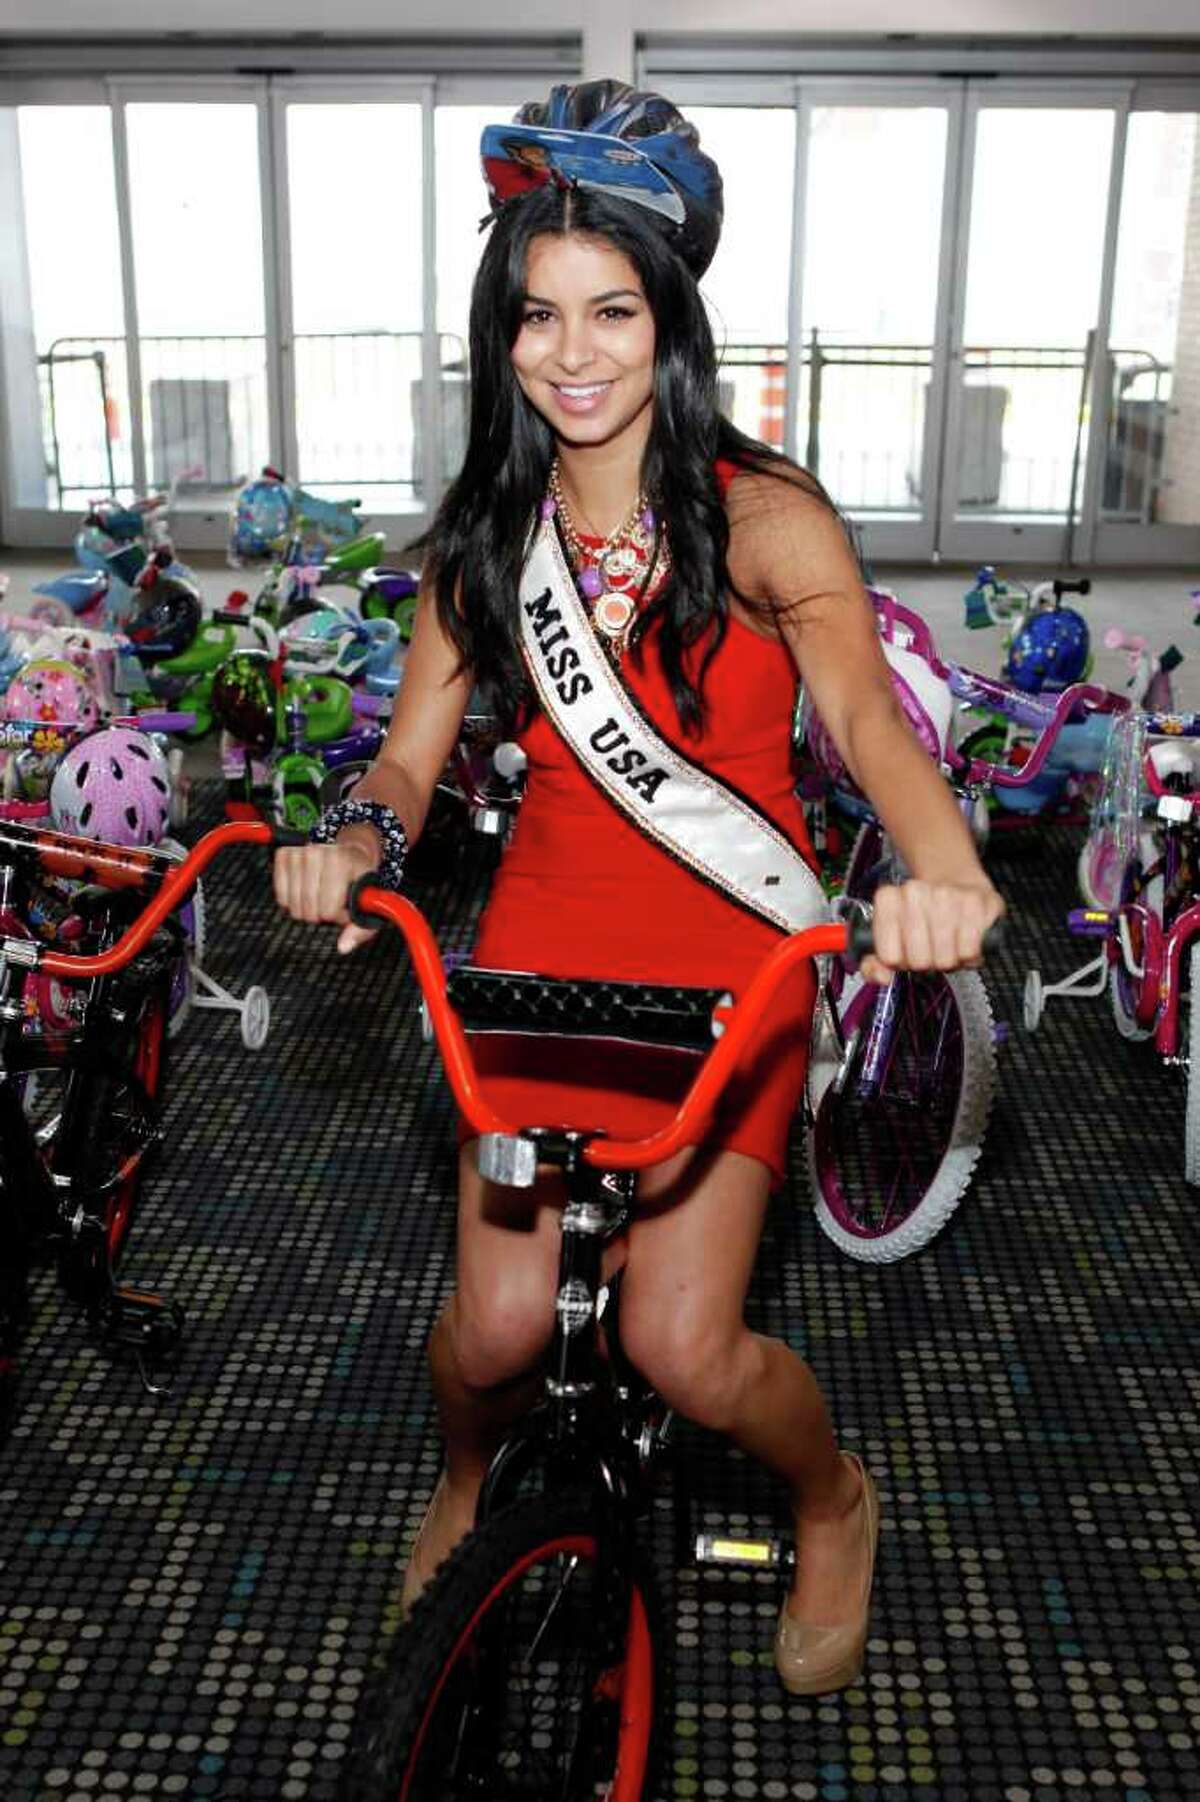 Miss USA Rima Fakih builds bikes for children at Pier 88 on May 26, 2011 in New York City.